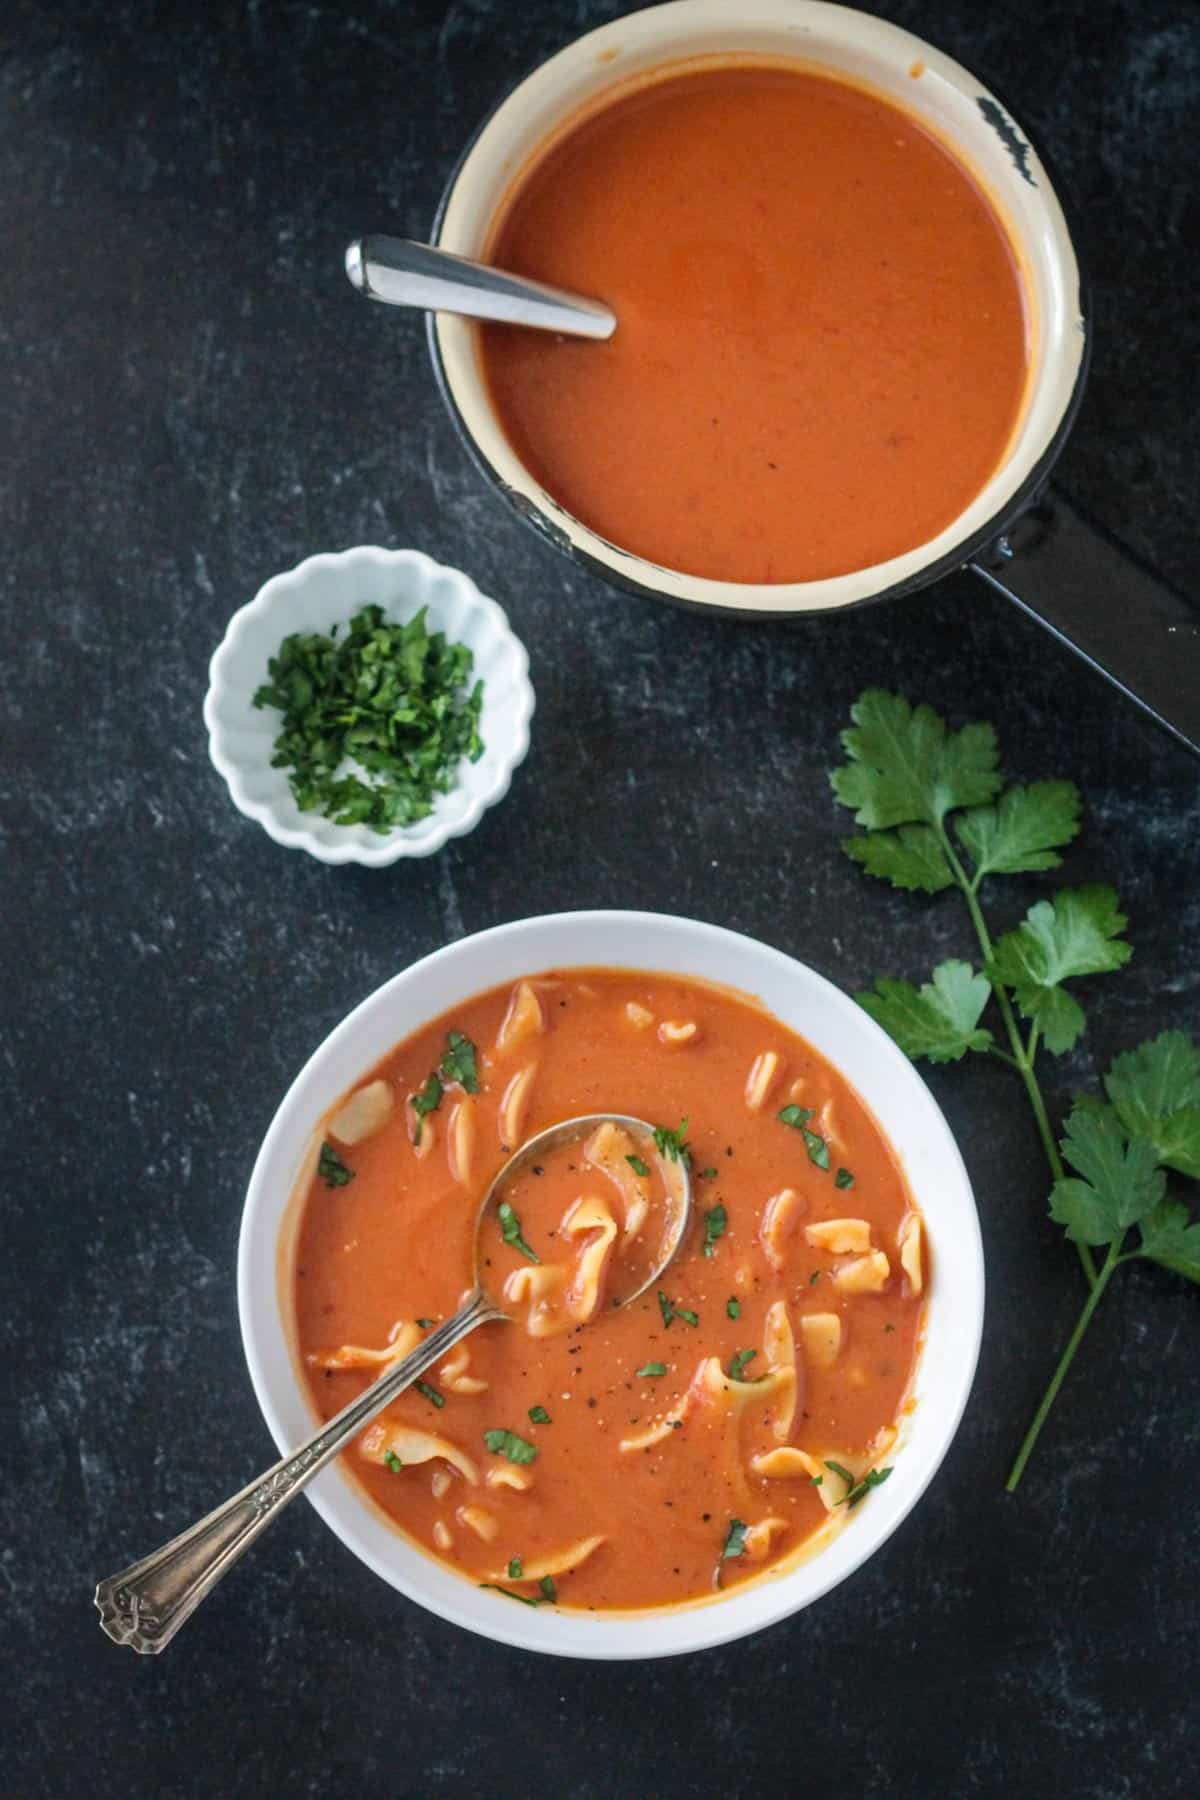 Bowl of tomato noodle soup in front of a pot of more soup.